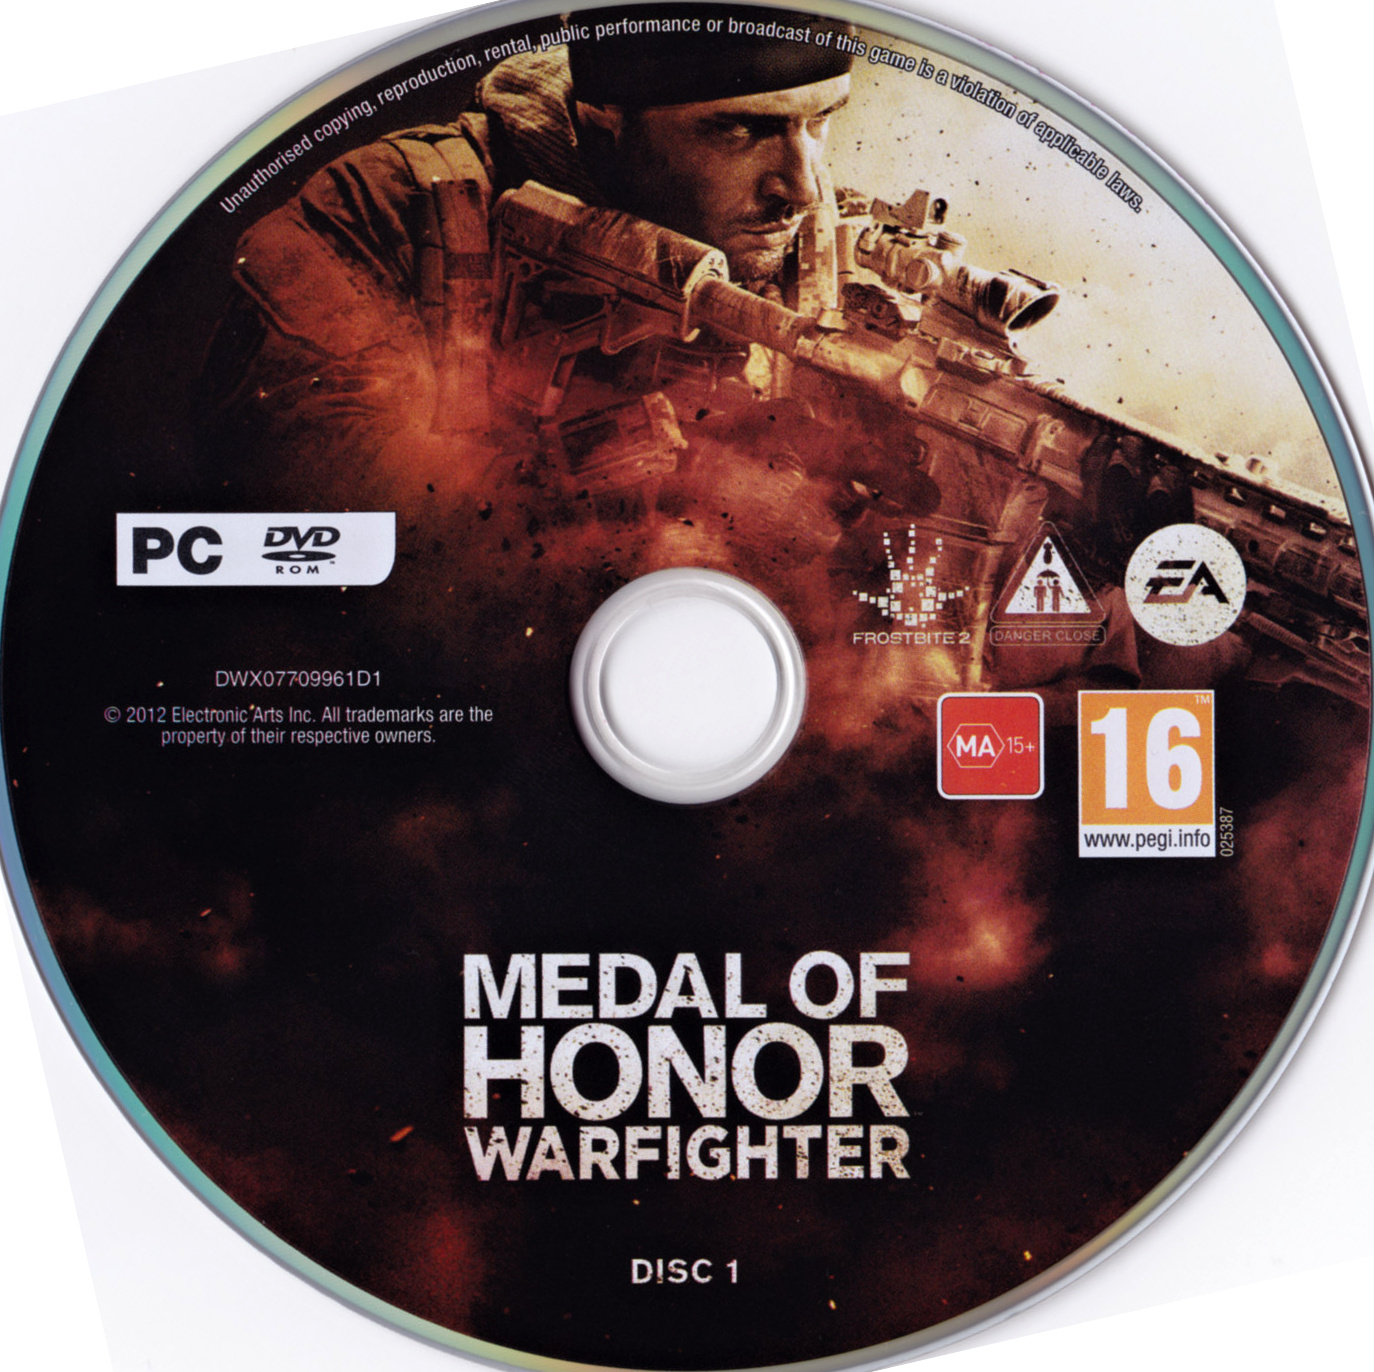 Medal of honor трейнер. Medal of Honor Limited Edition. Medal of Honor Limited Edition PC game Cover. Medal of Honor Warfighter диск с игрой на ПК. Medal of Honor Warfighter ps3 диск.